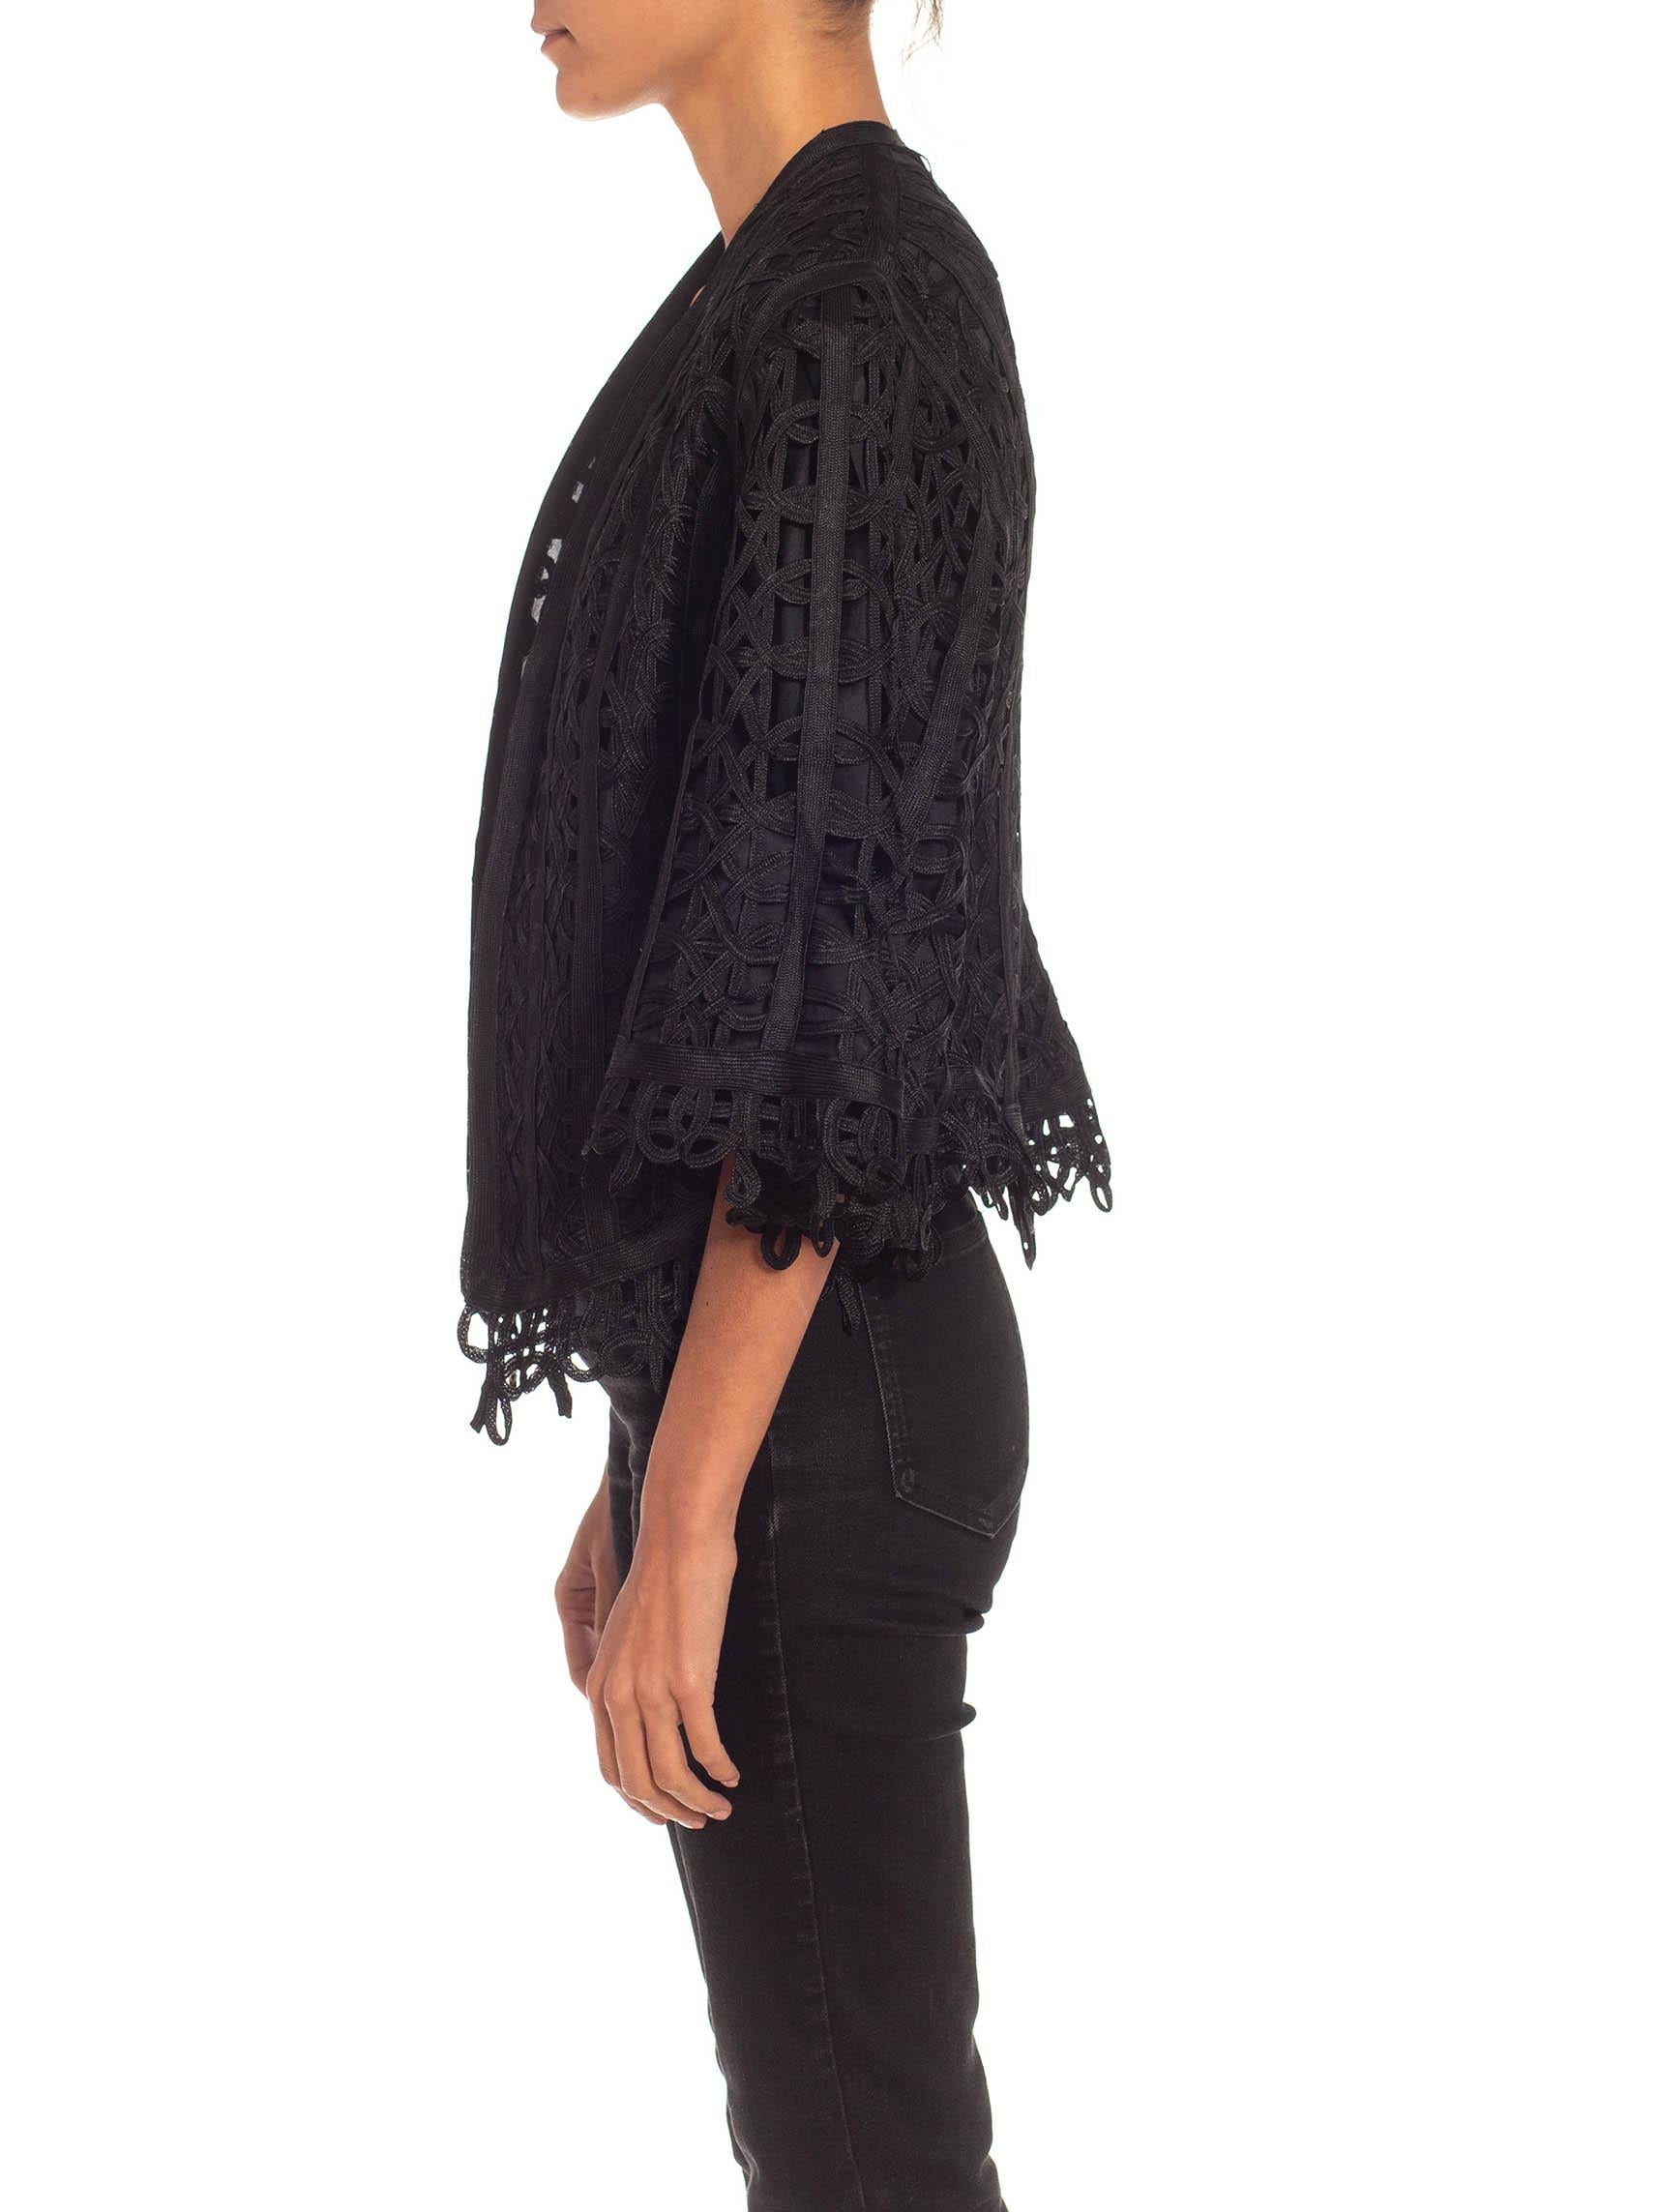 Victorian Black Silk Tape Lace Short Jacket With 3 Quarter Sleeves In Excellent Condition For Sale In New York, NY